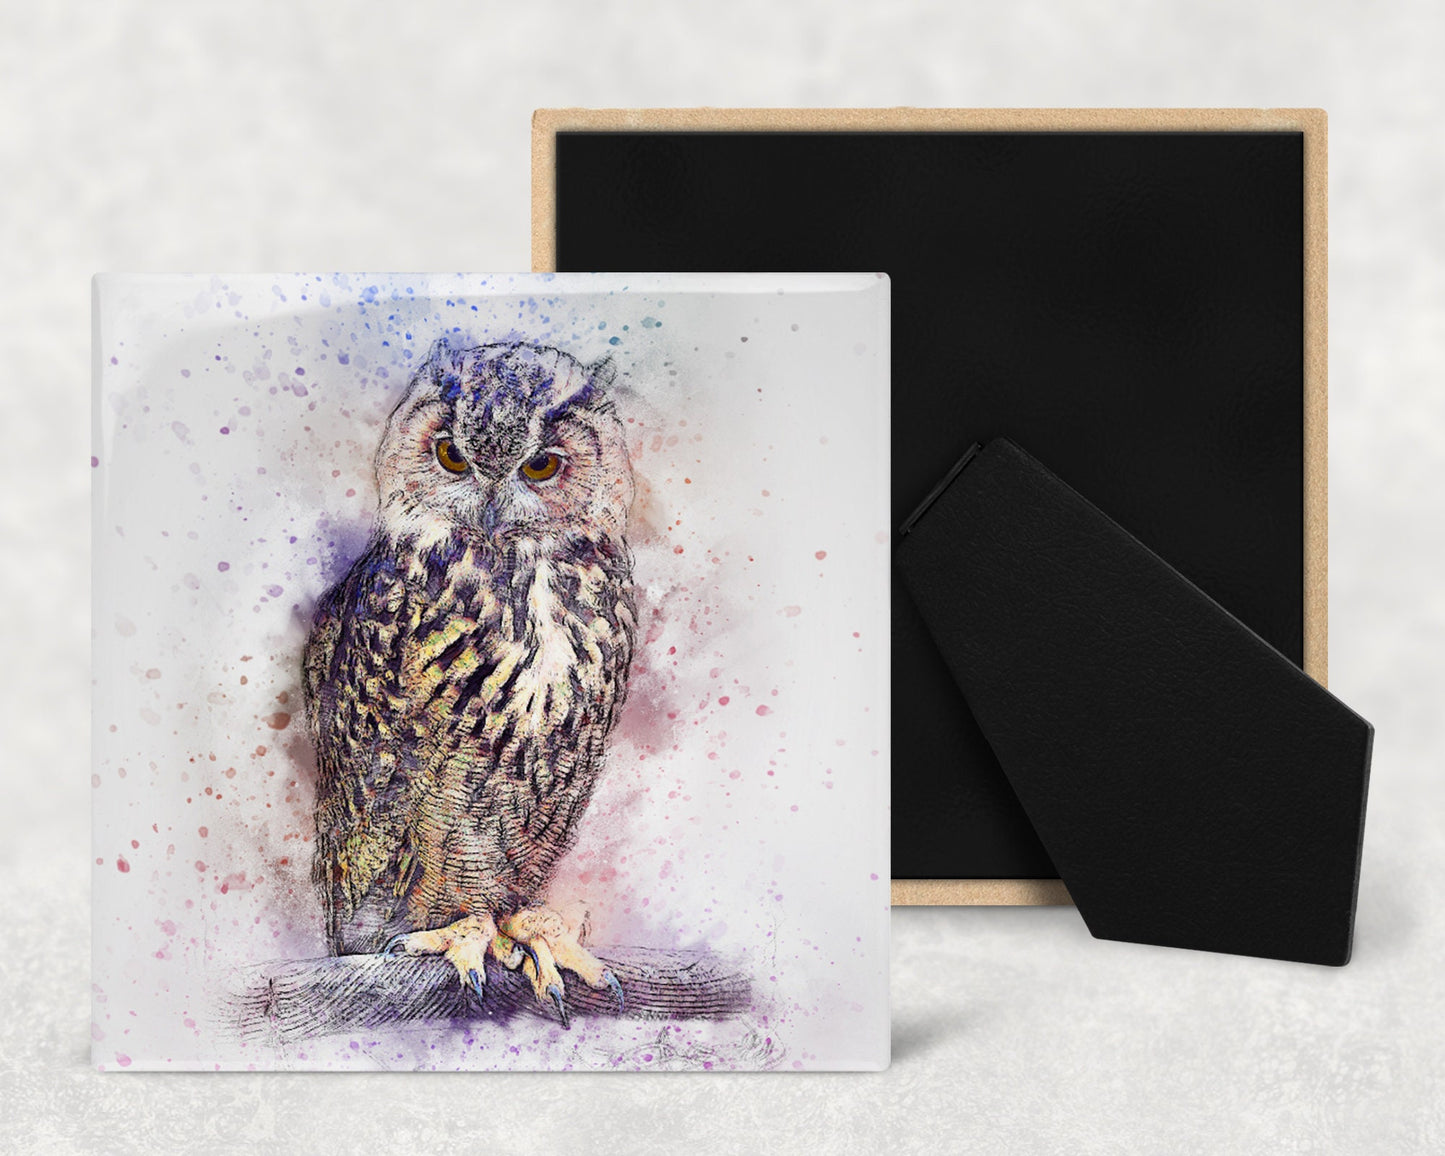 Watercolor Owl Art Decorative Ceramic Tile with Optional Easel Back - Available in 3 Sizes